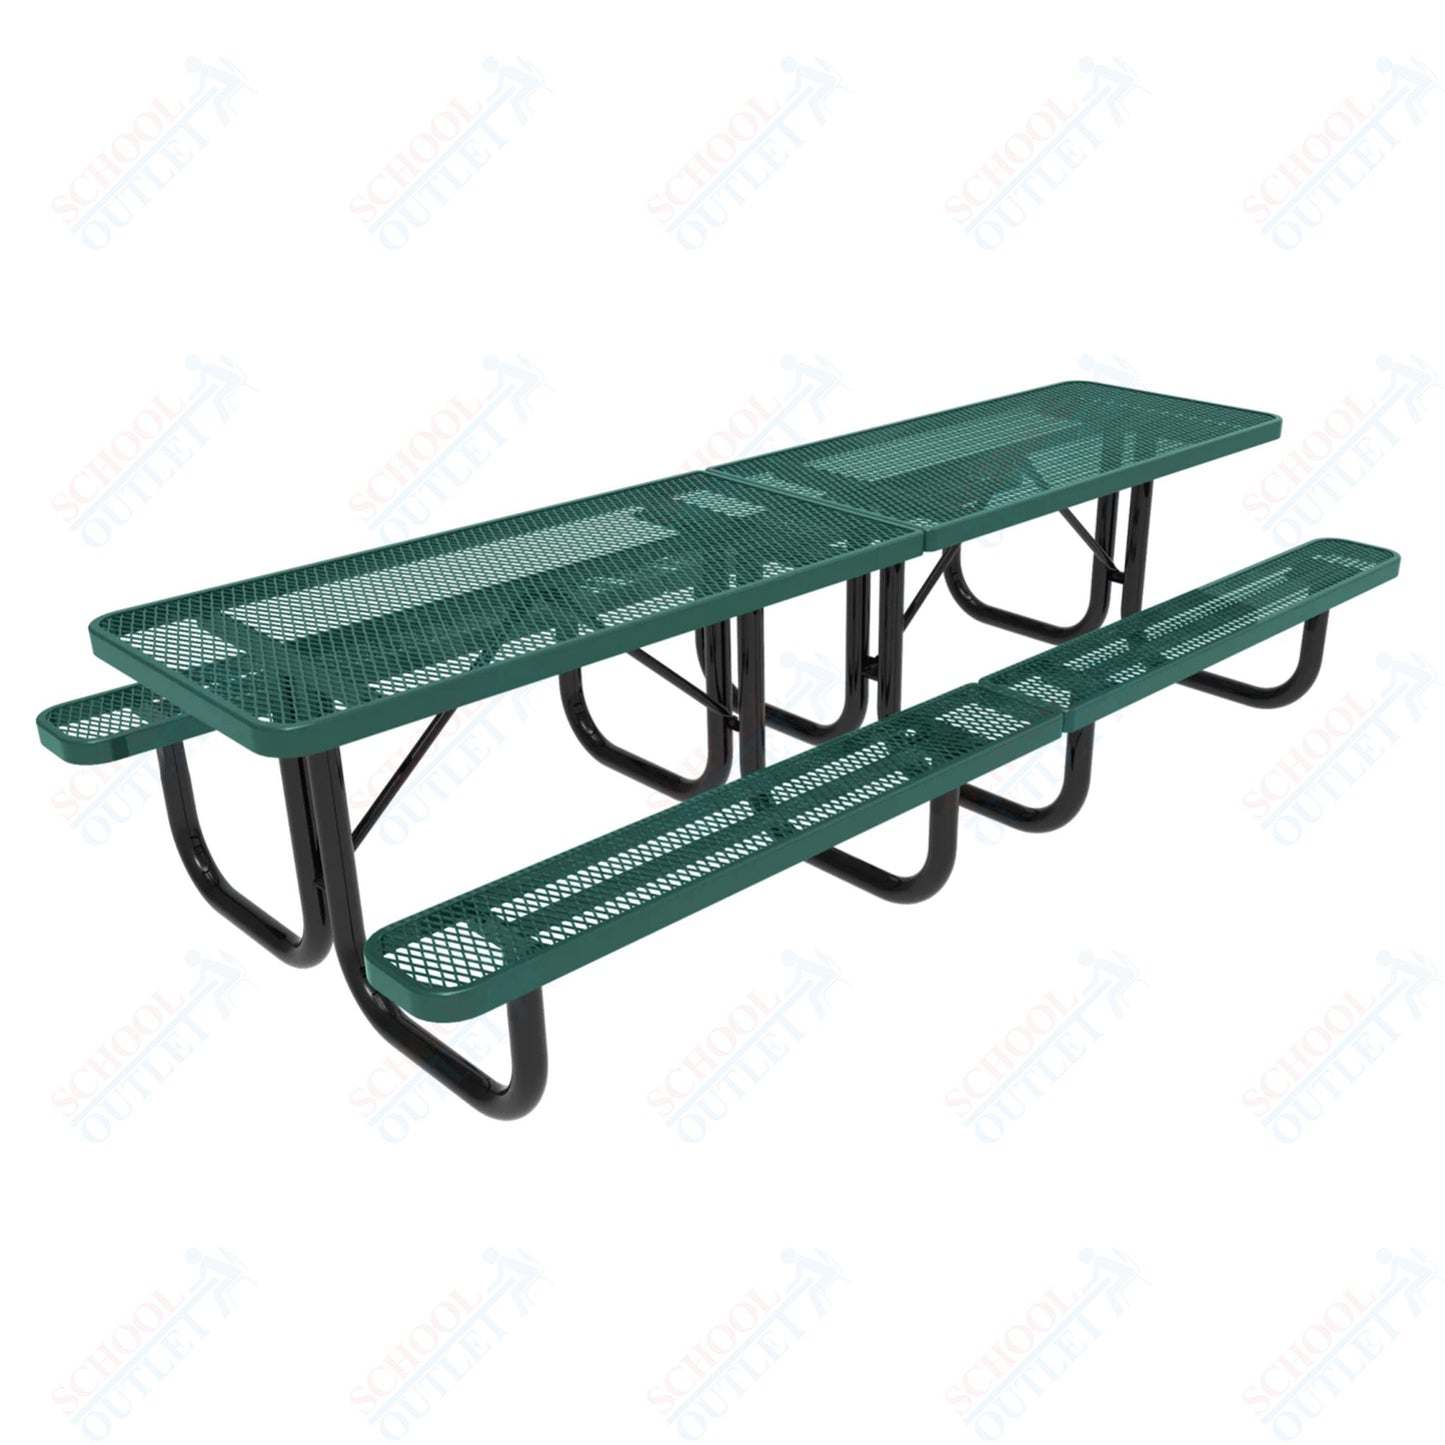 MyTcoat MYT-TRT10 10′ Rectangular Portable Picnic Table with 2- 5′ Sections (120"W x 60"D x 30"H)